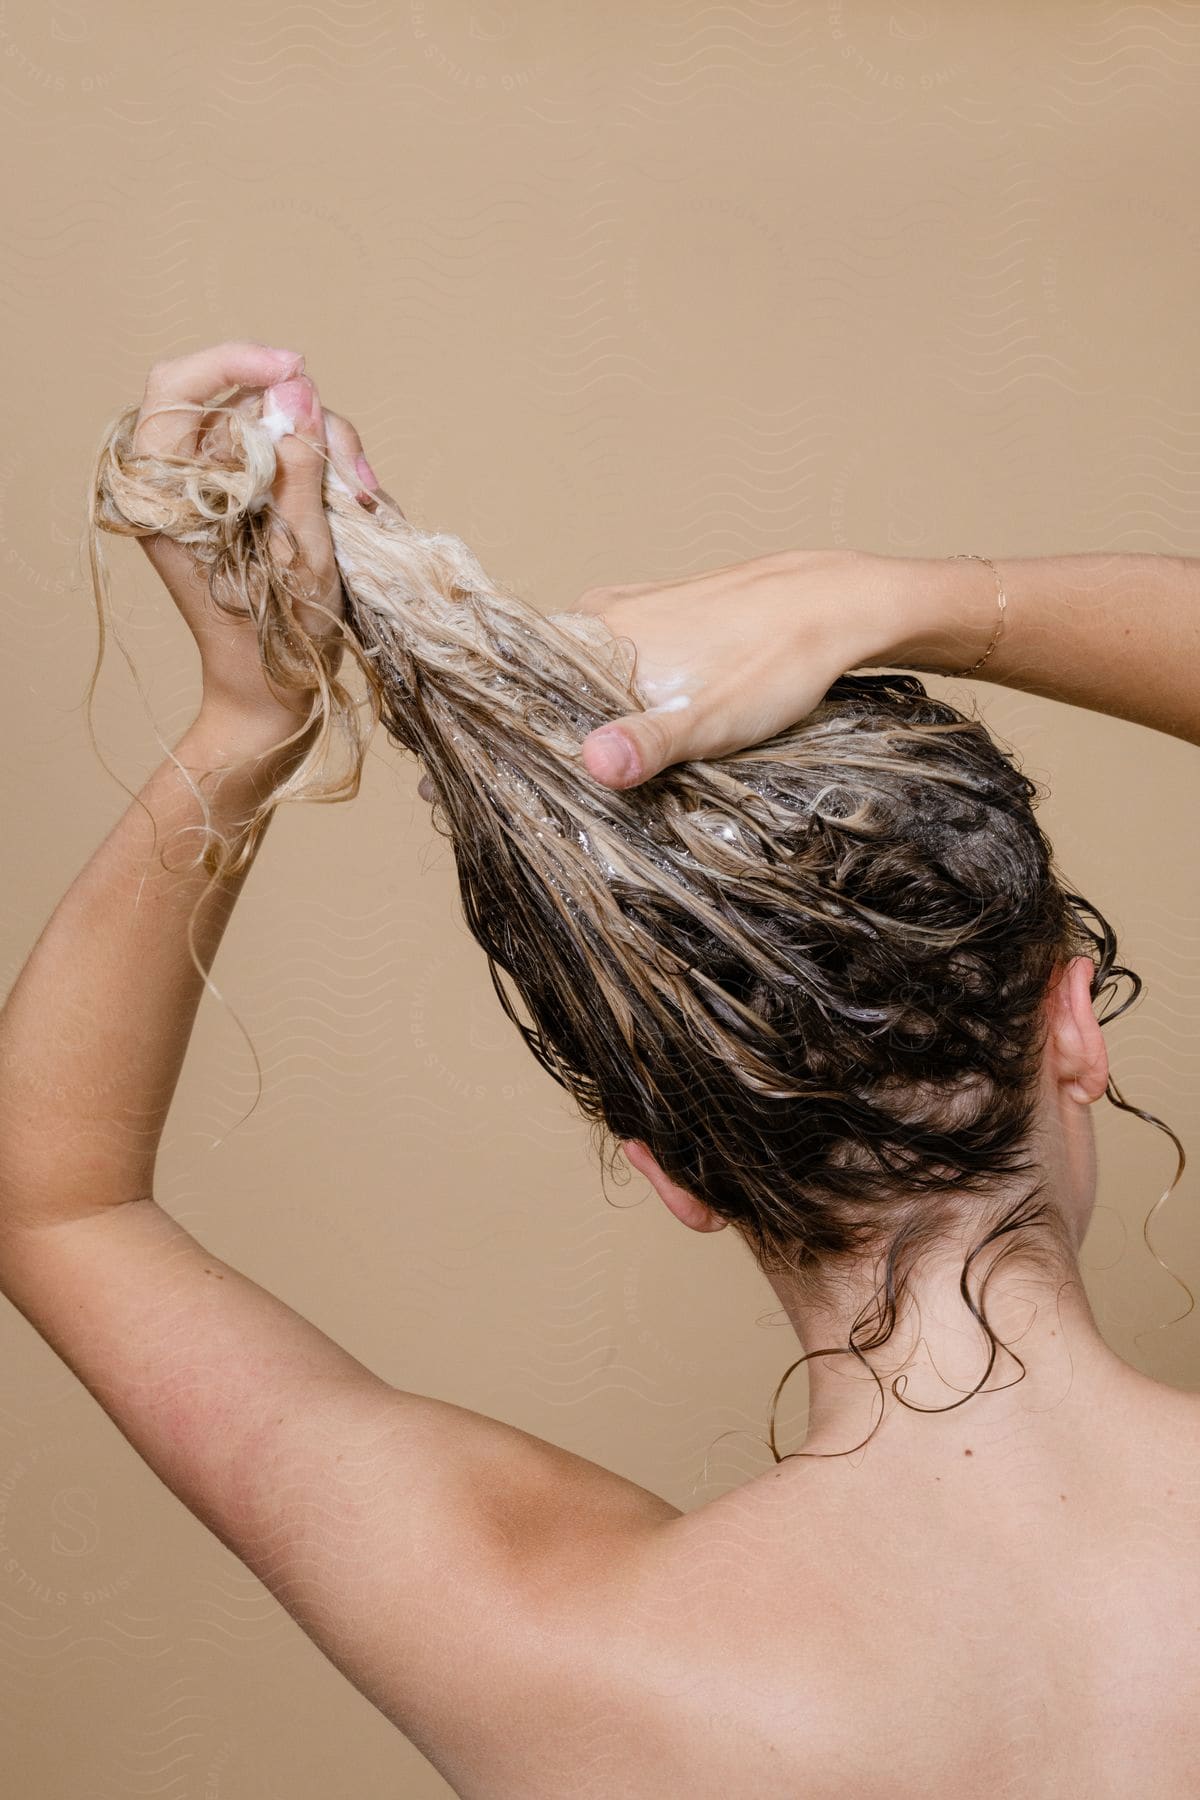 A woman with her back turned, washing her curly hair with blonde highlights.